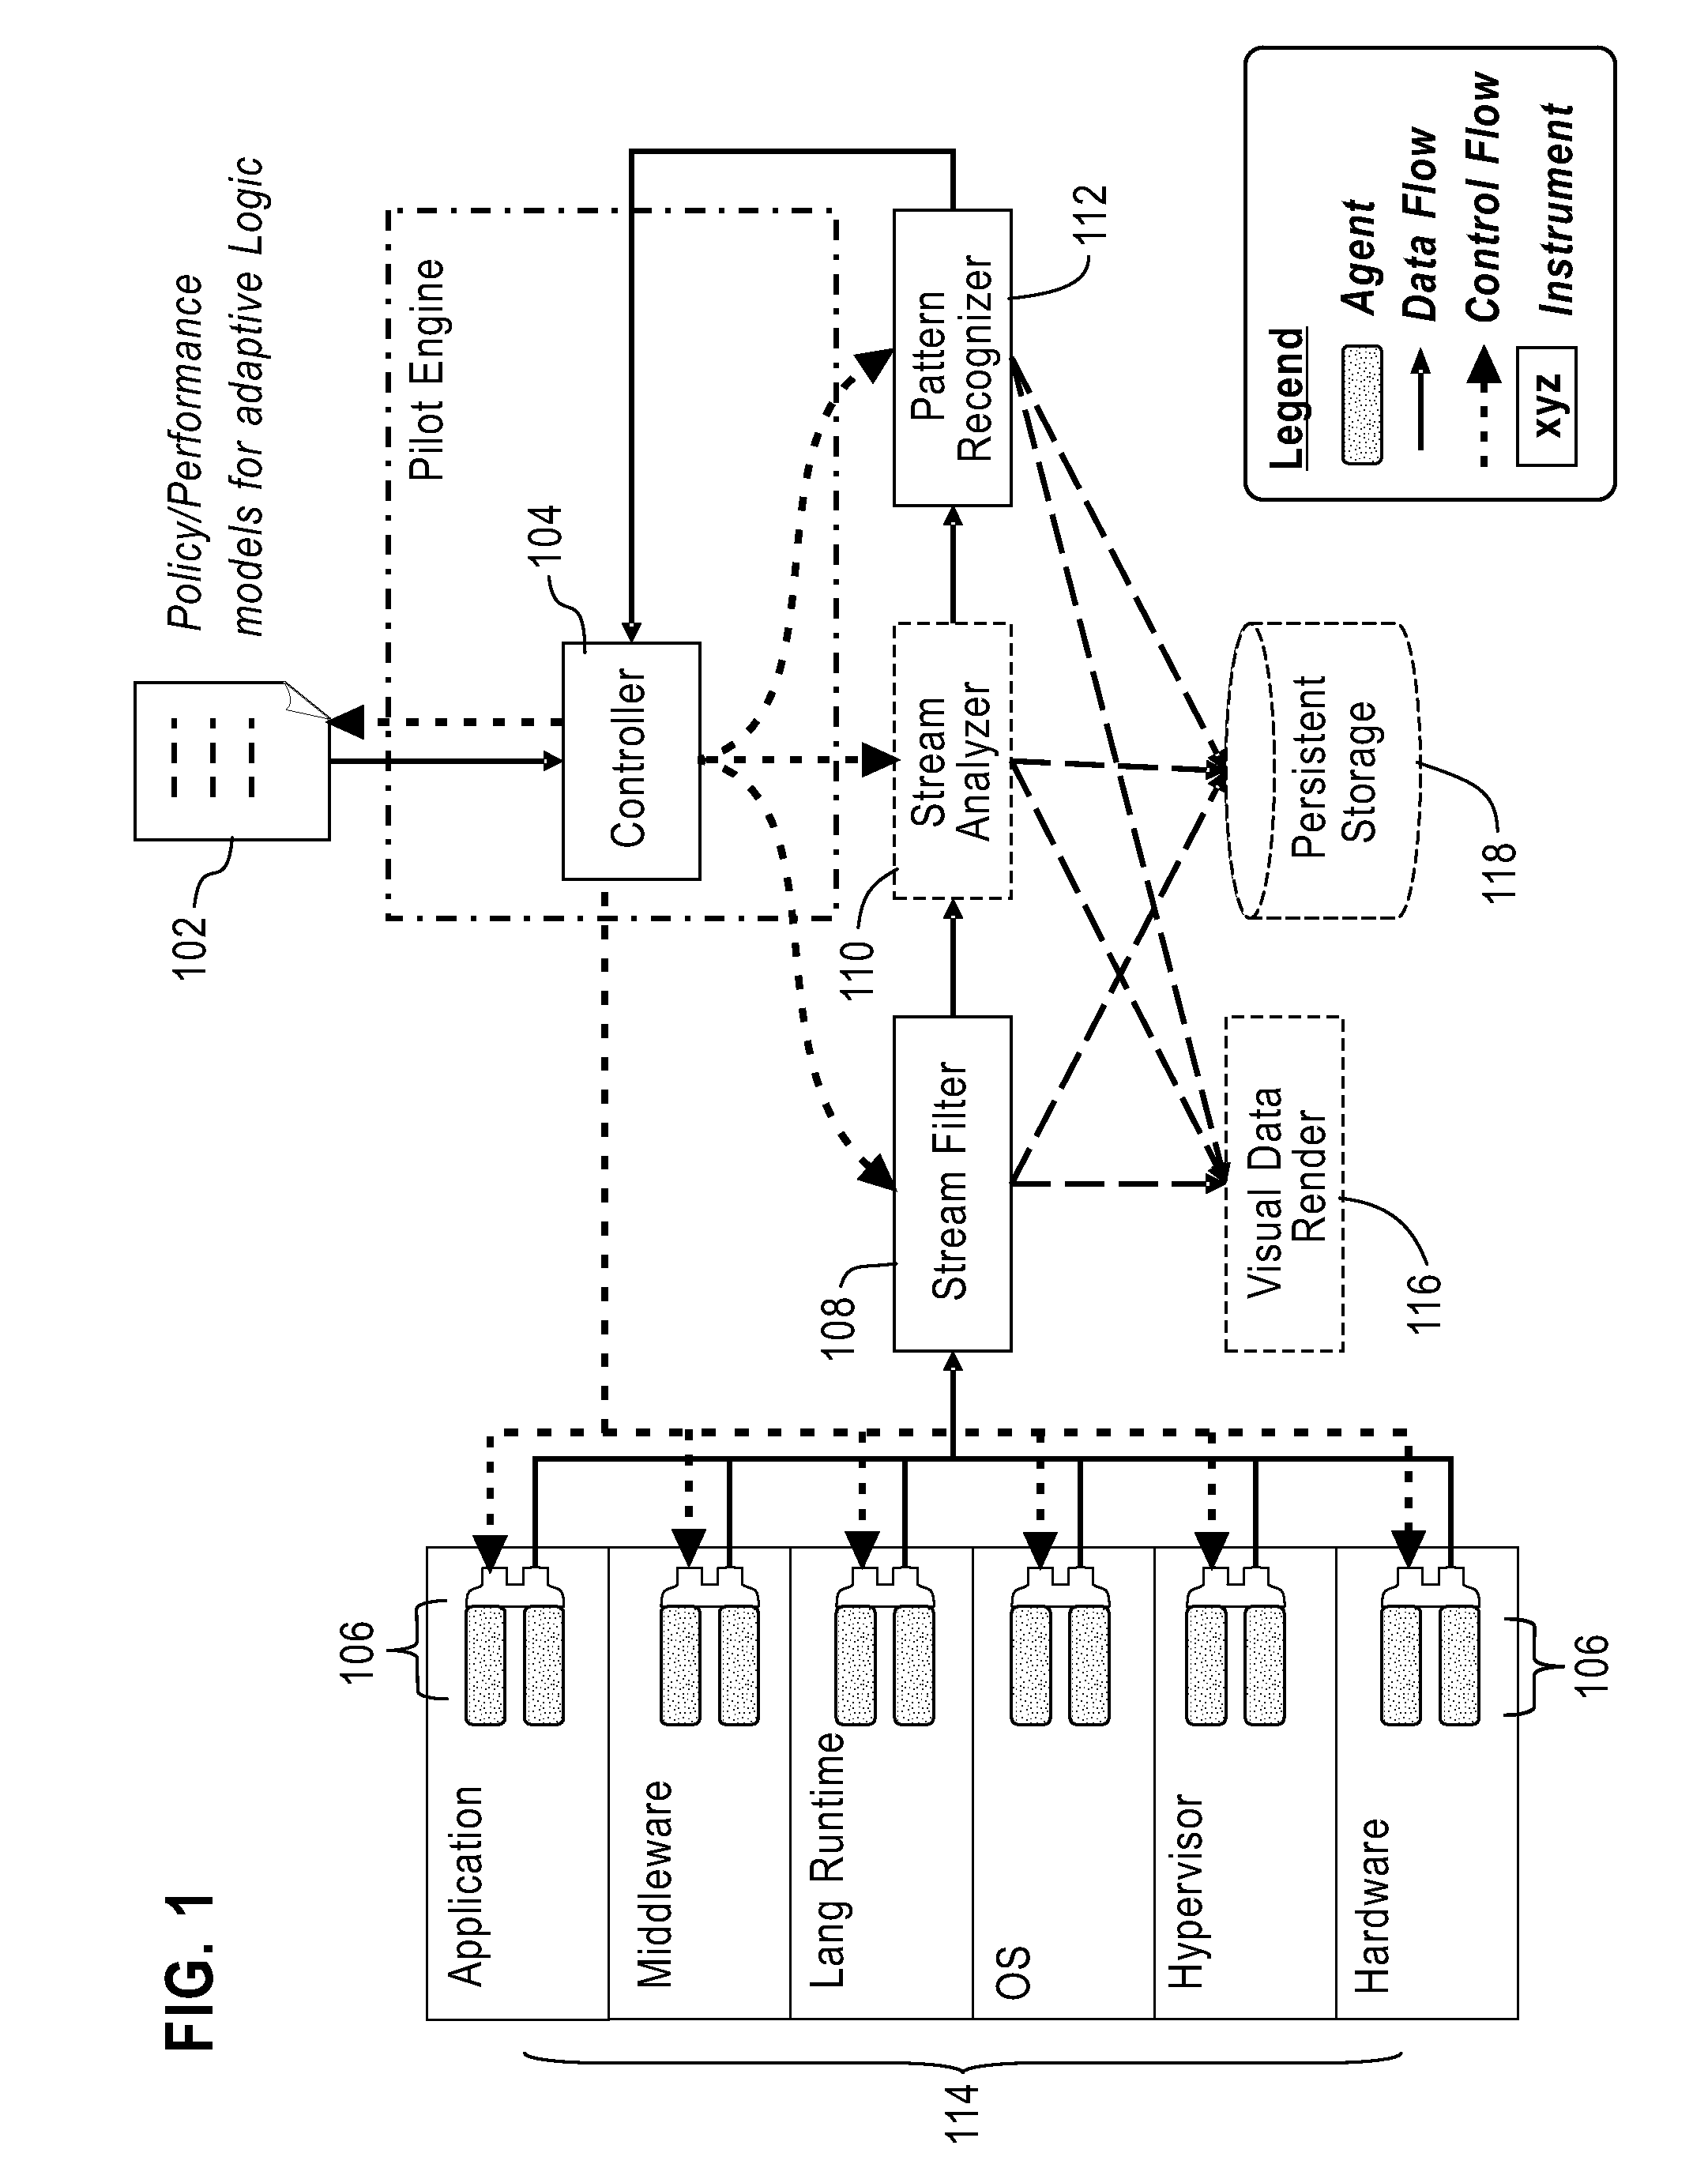 Mechanism for adaptive profiling for performance analysis